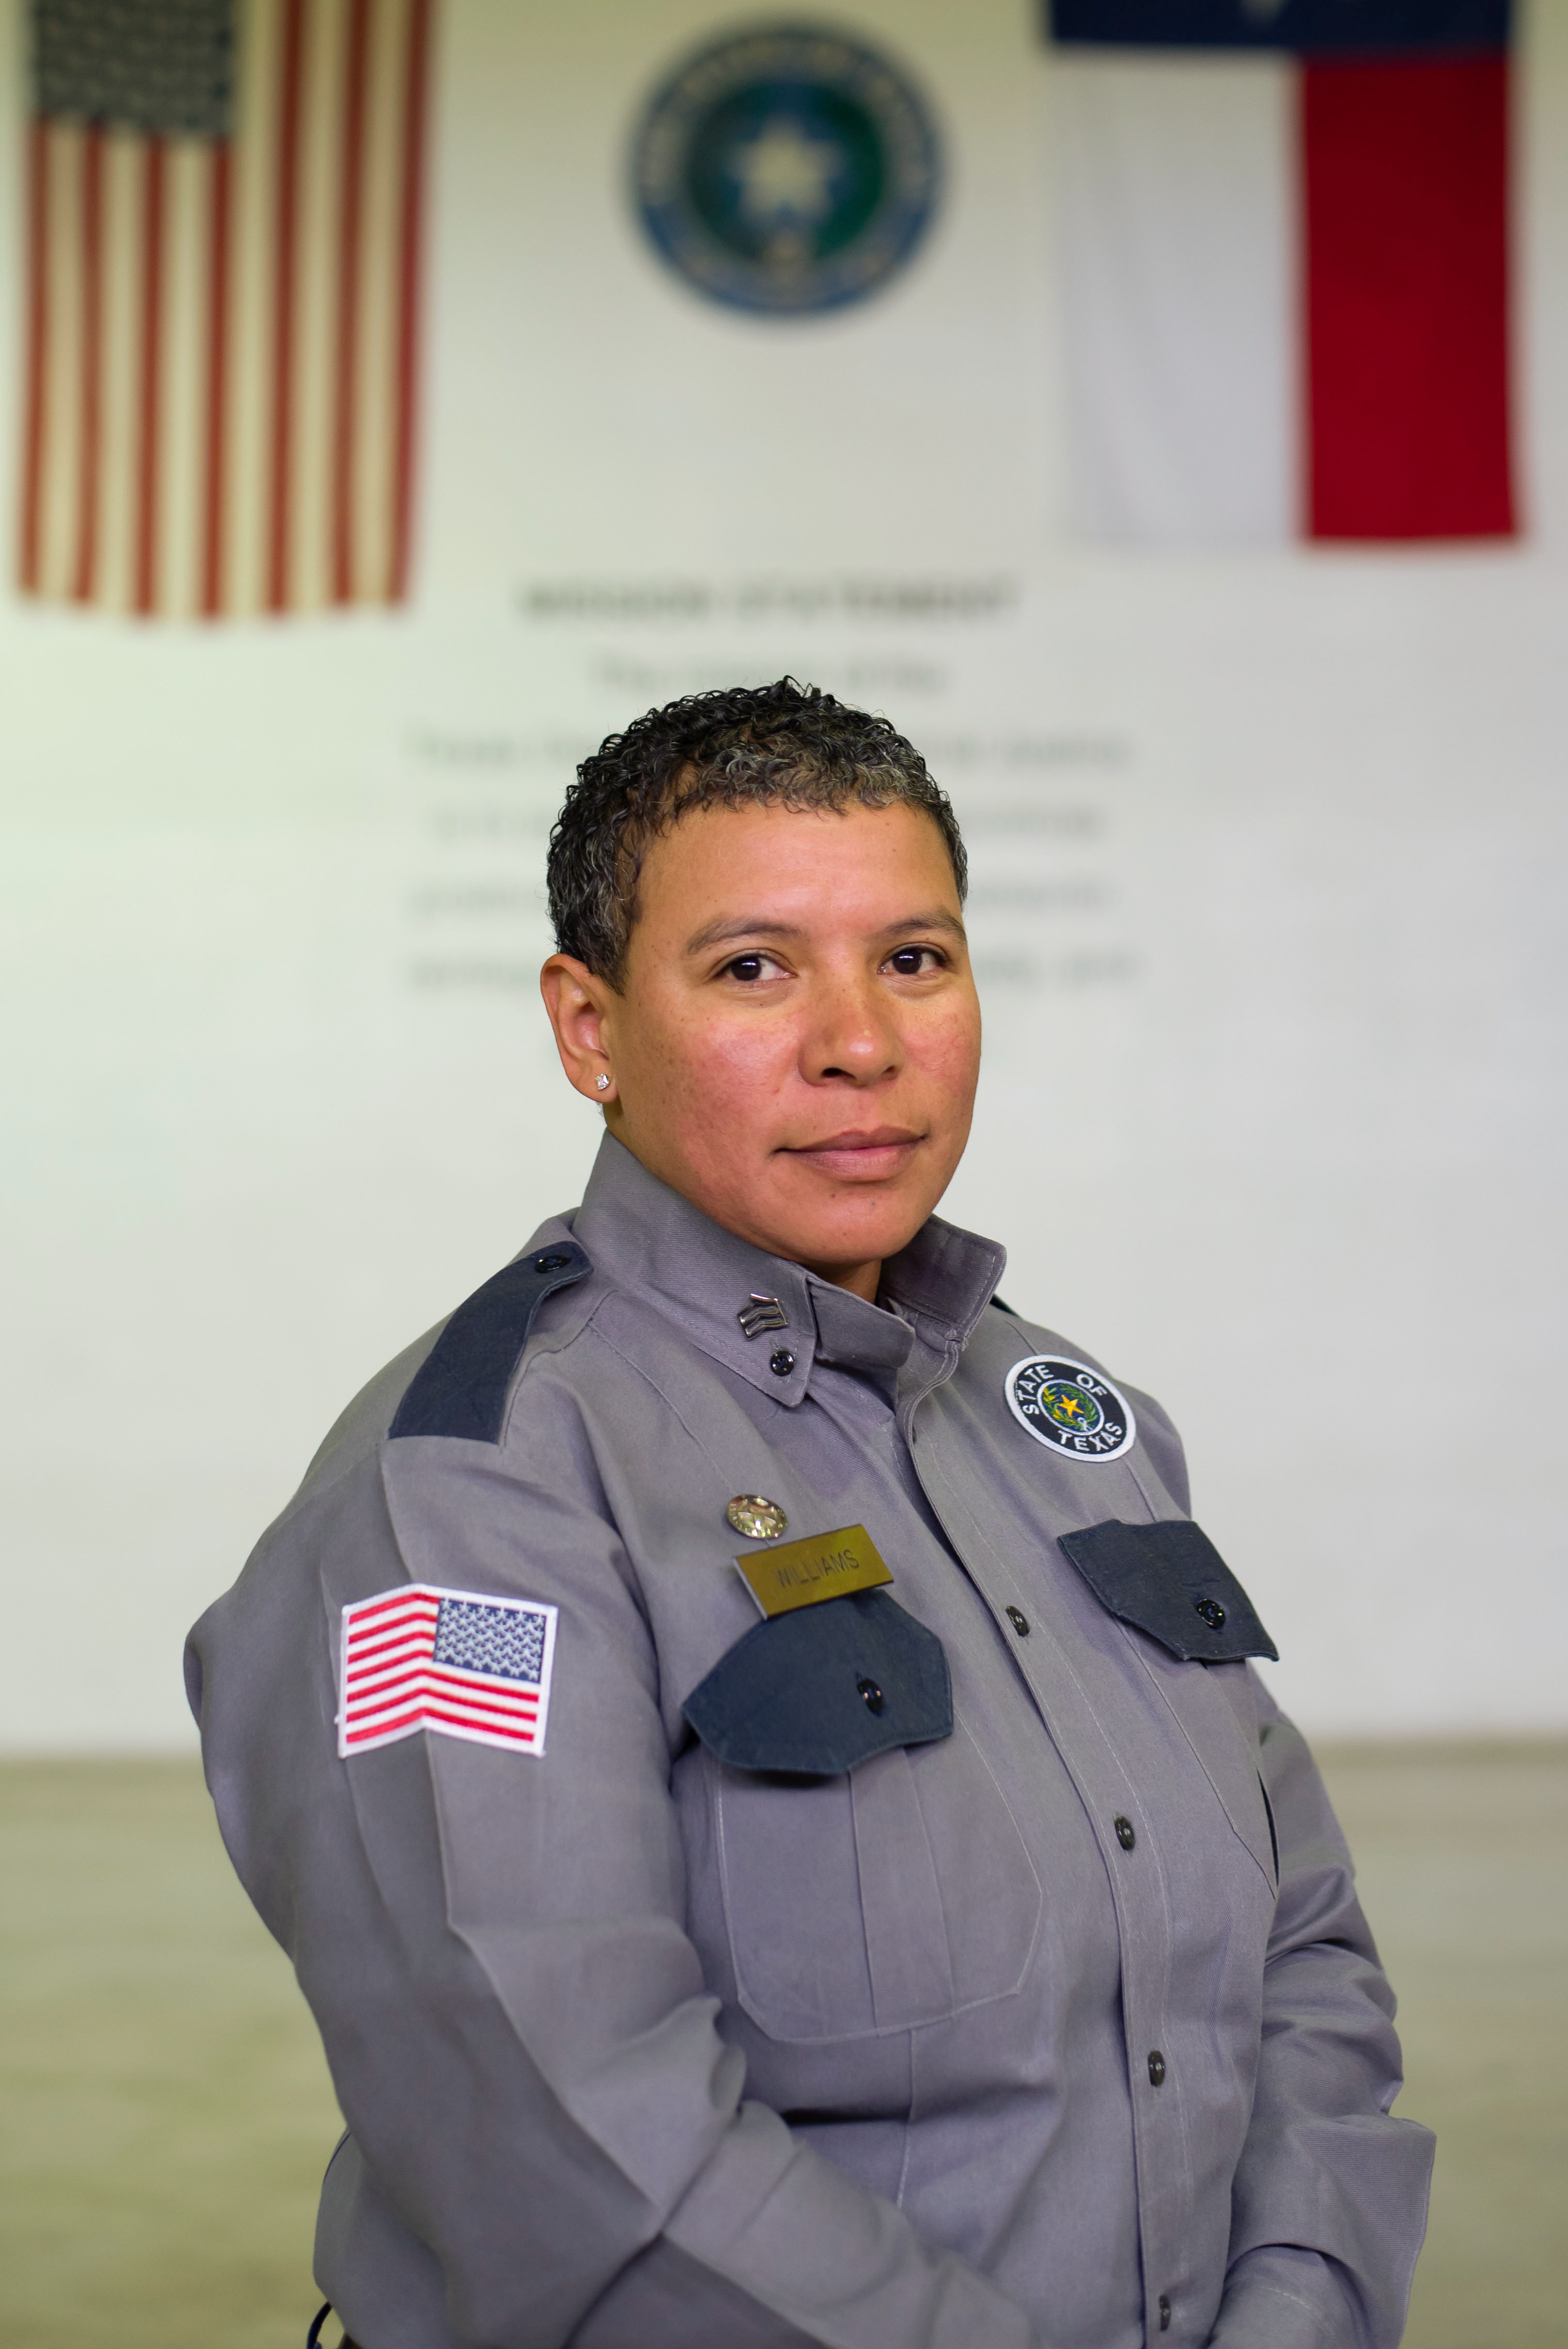 At a Texas prison, a ‘drill instructor’ sergeant motivates, inspires rookies 